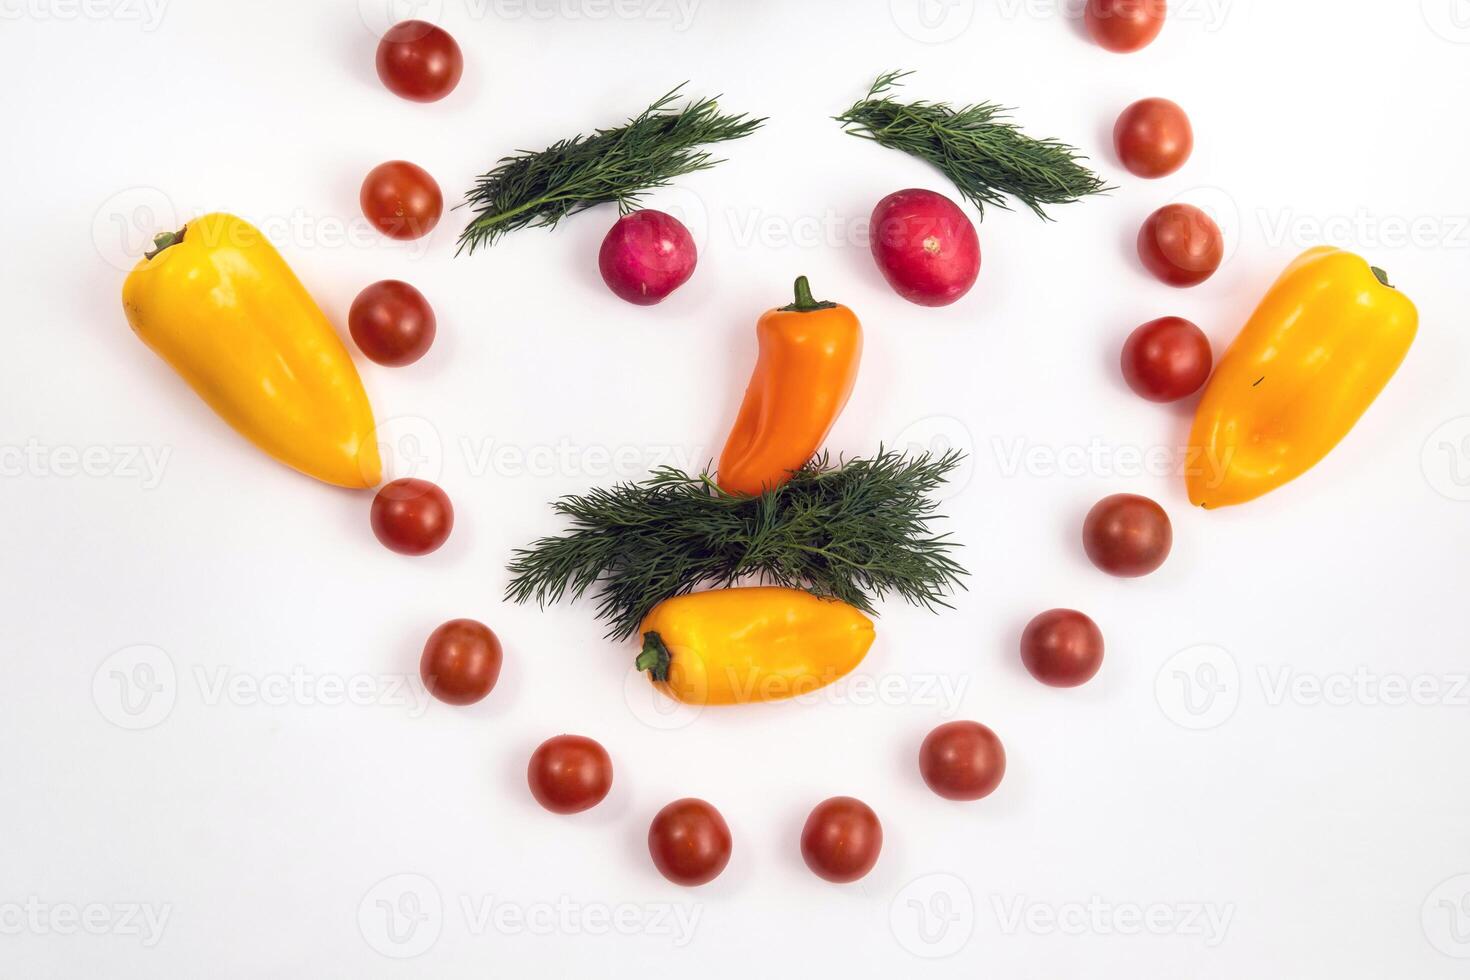 The face of a man made of sliced vegetables on a white background photo